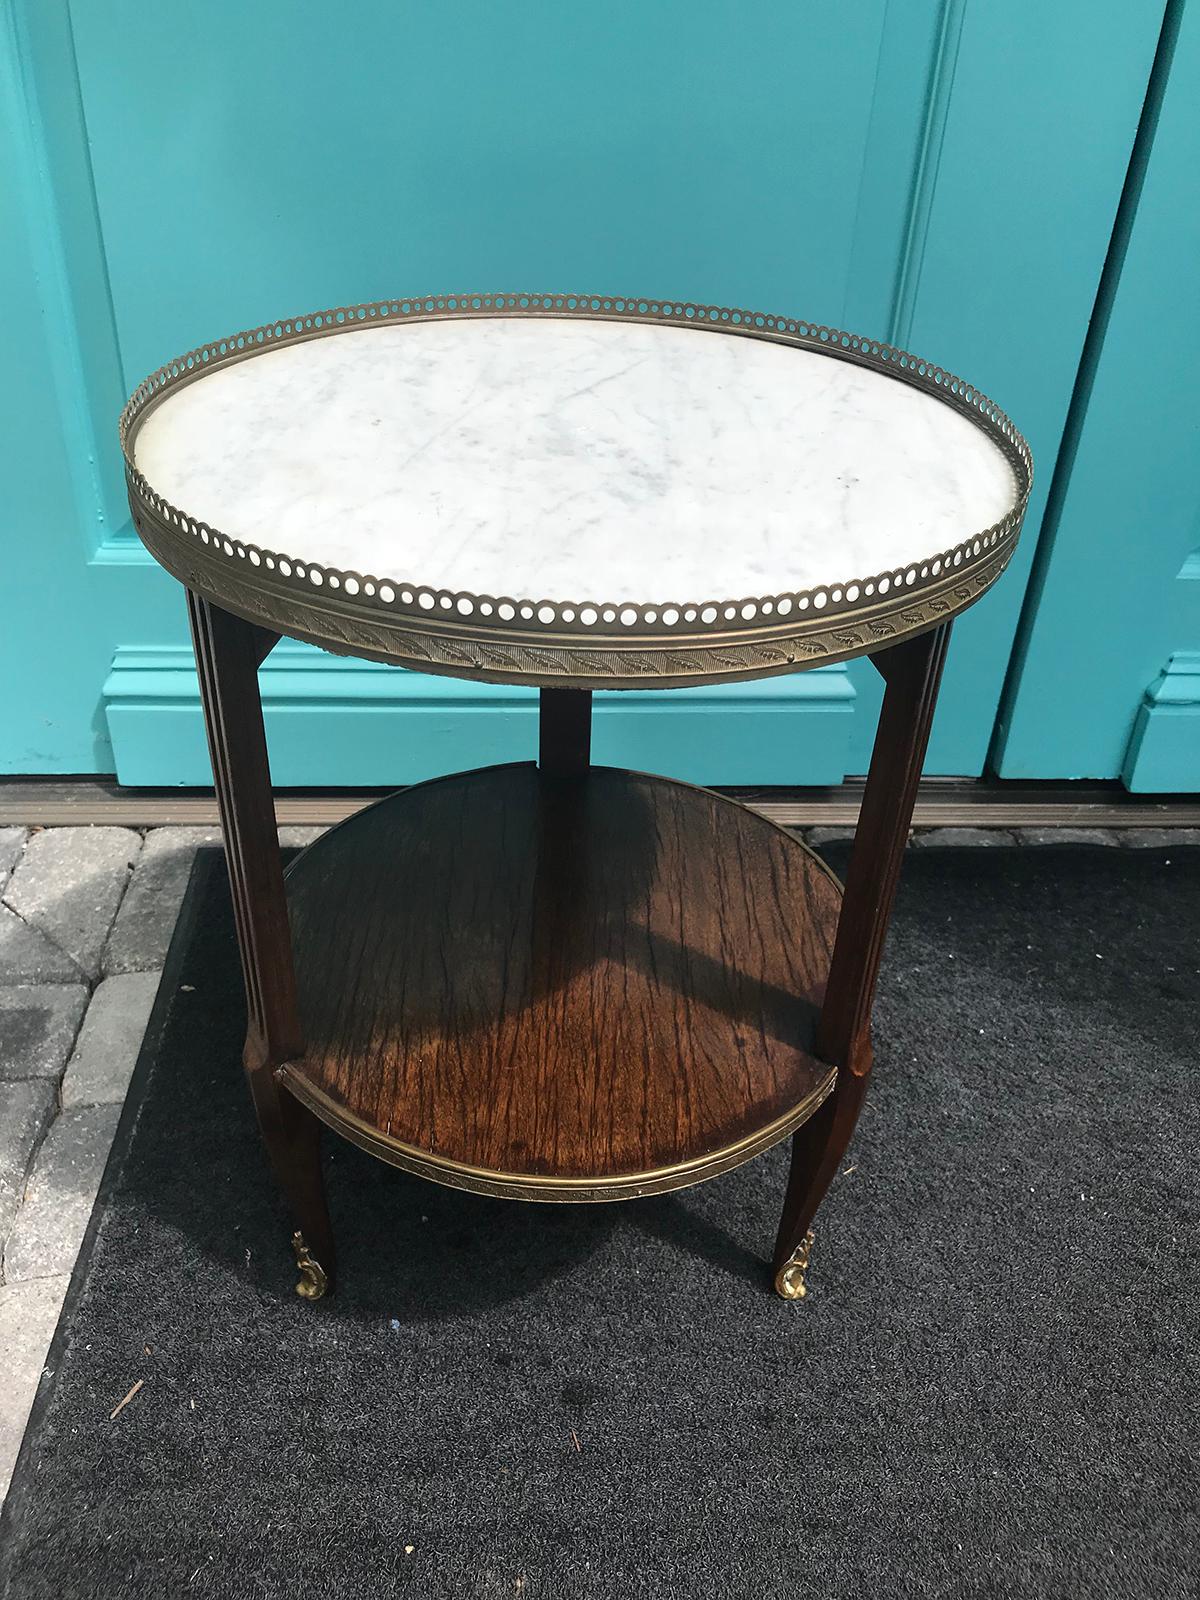 20th century small round marble side table with bronze gallery.